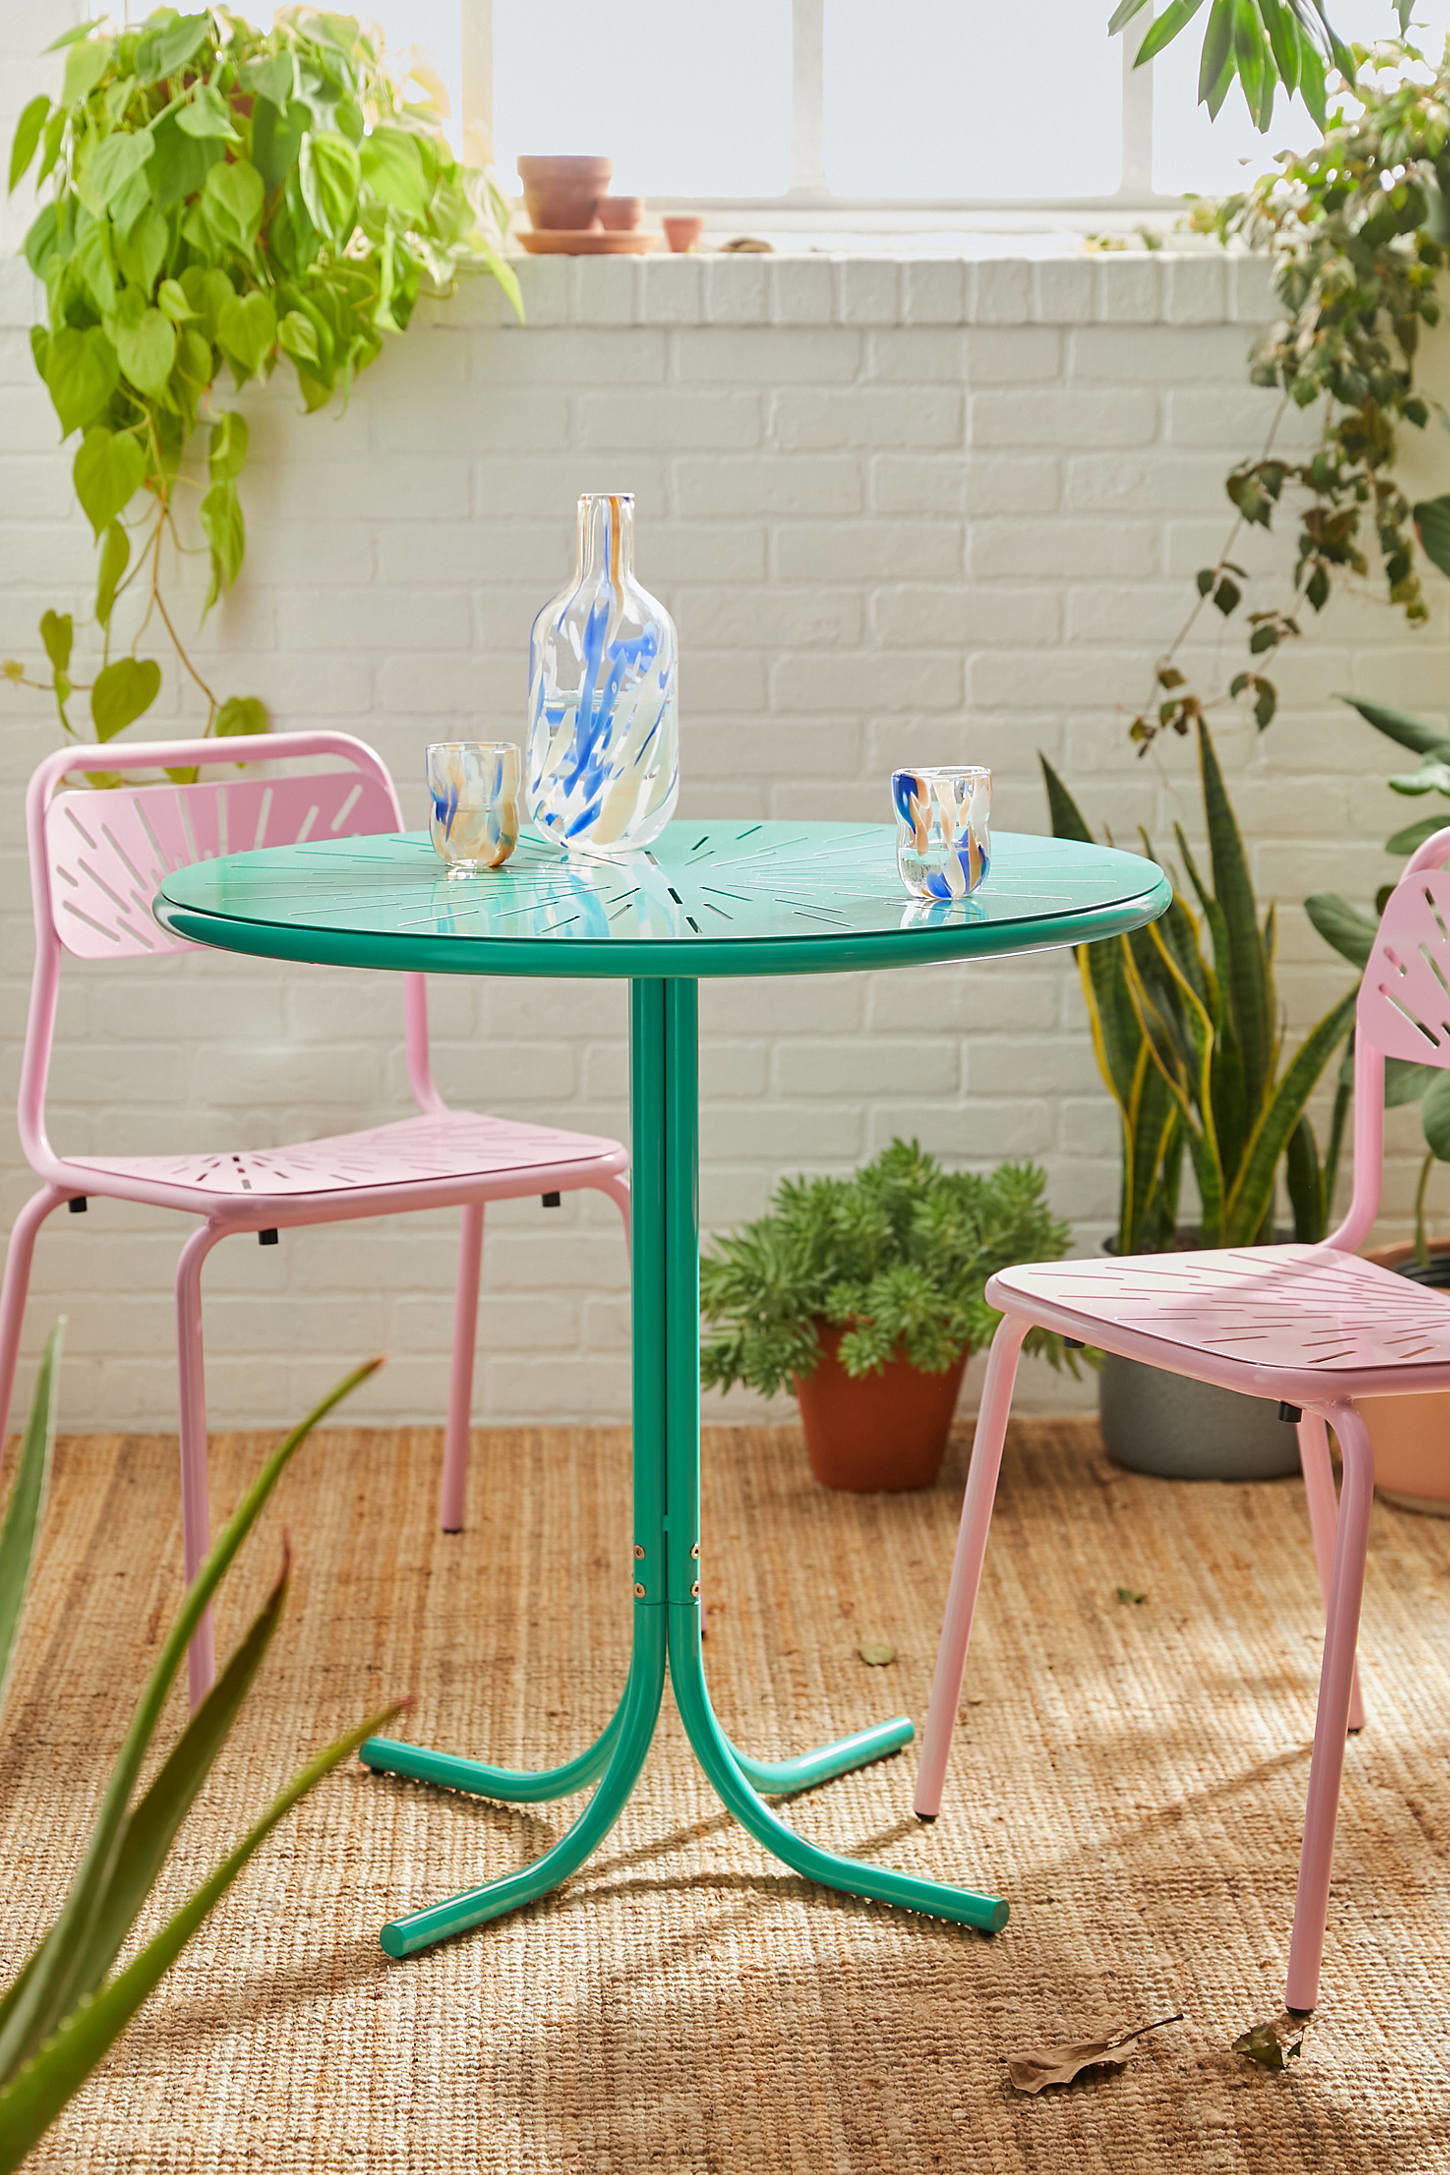 The table in green with pink chairs